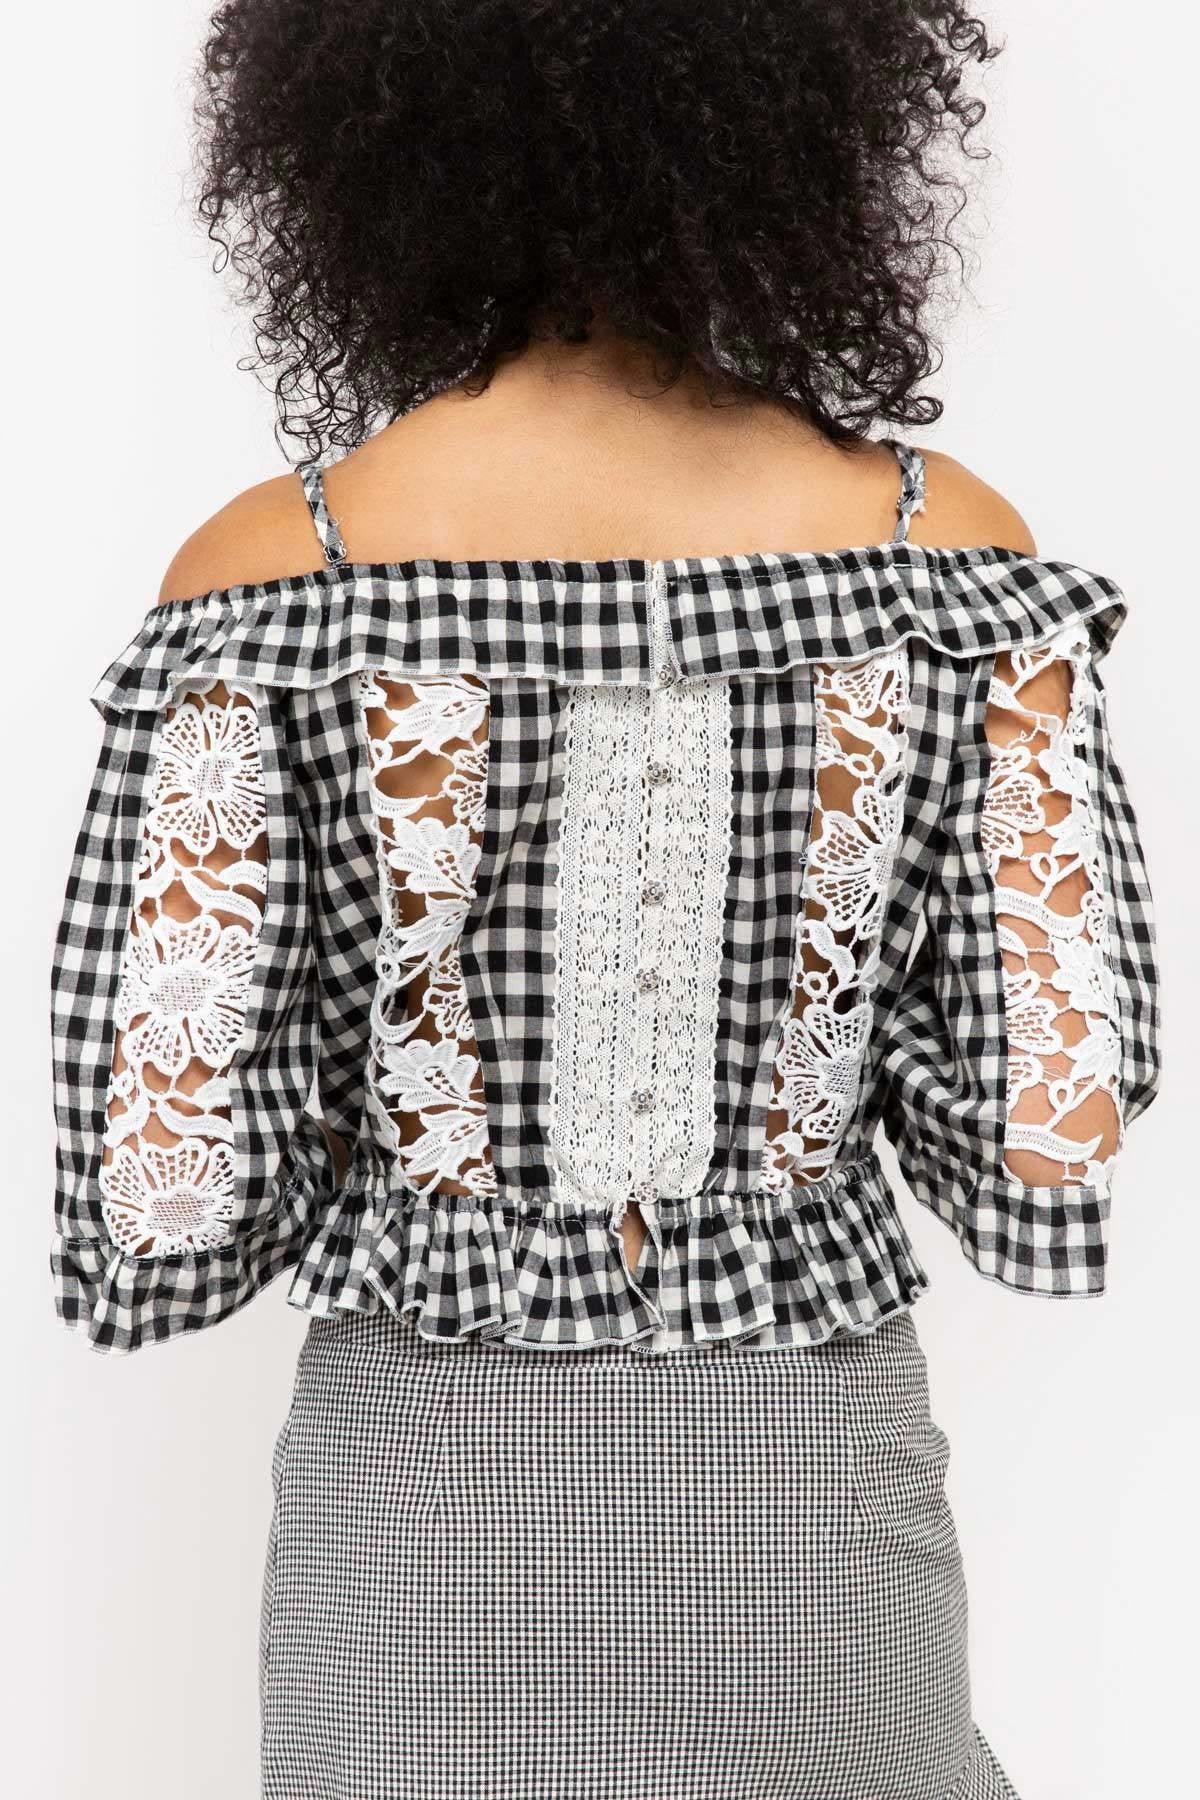 Gingham Crop Top With Crochet Lace Insets - steven wick